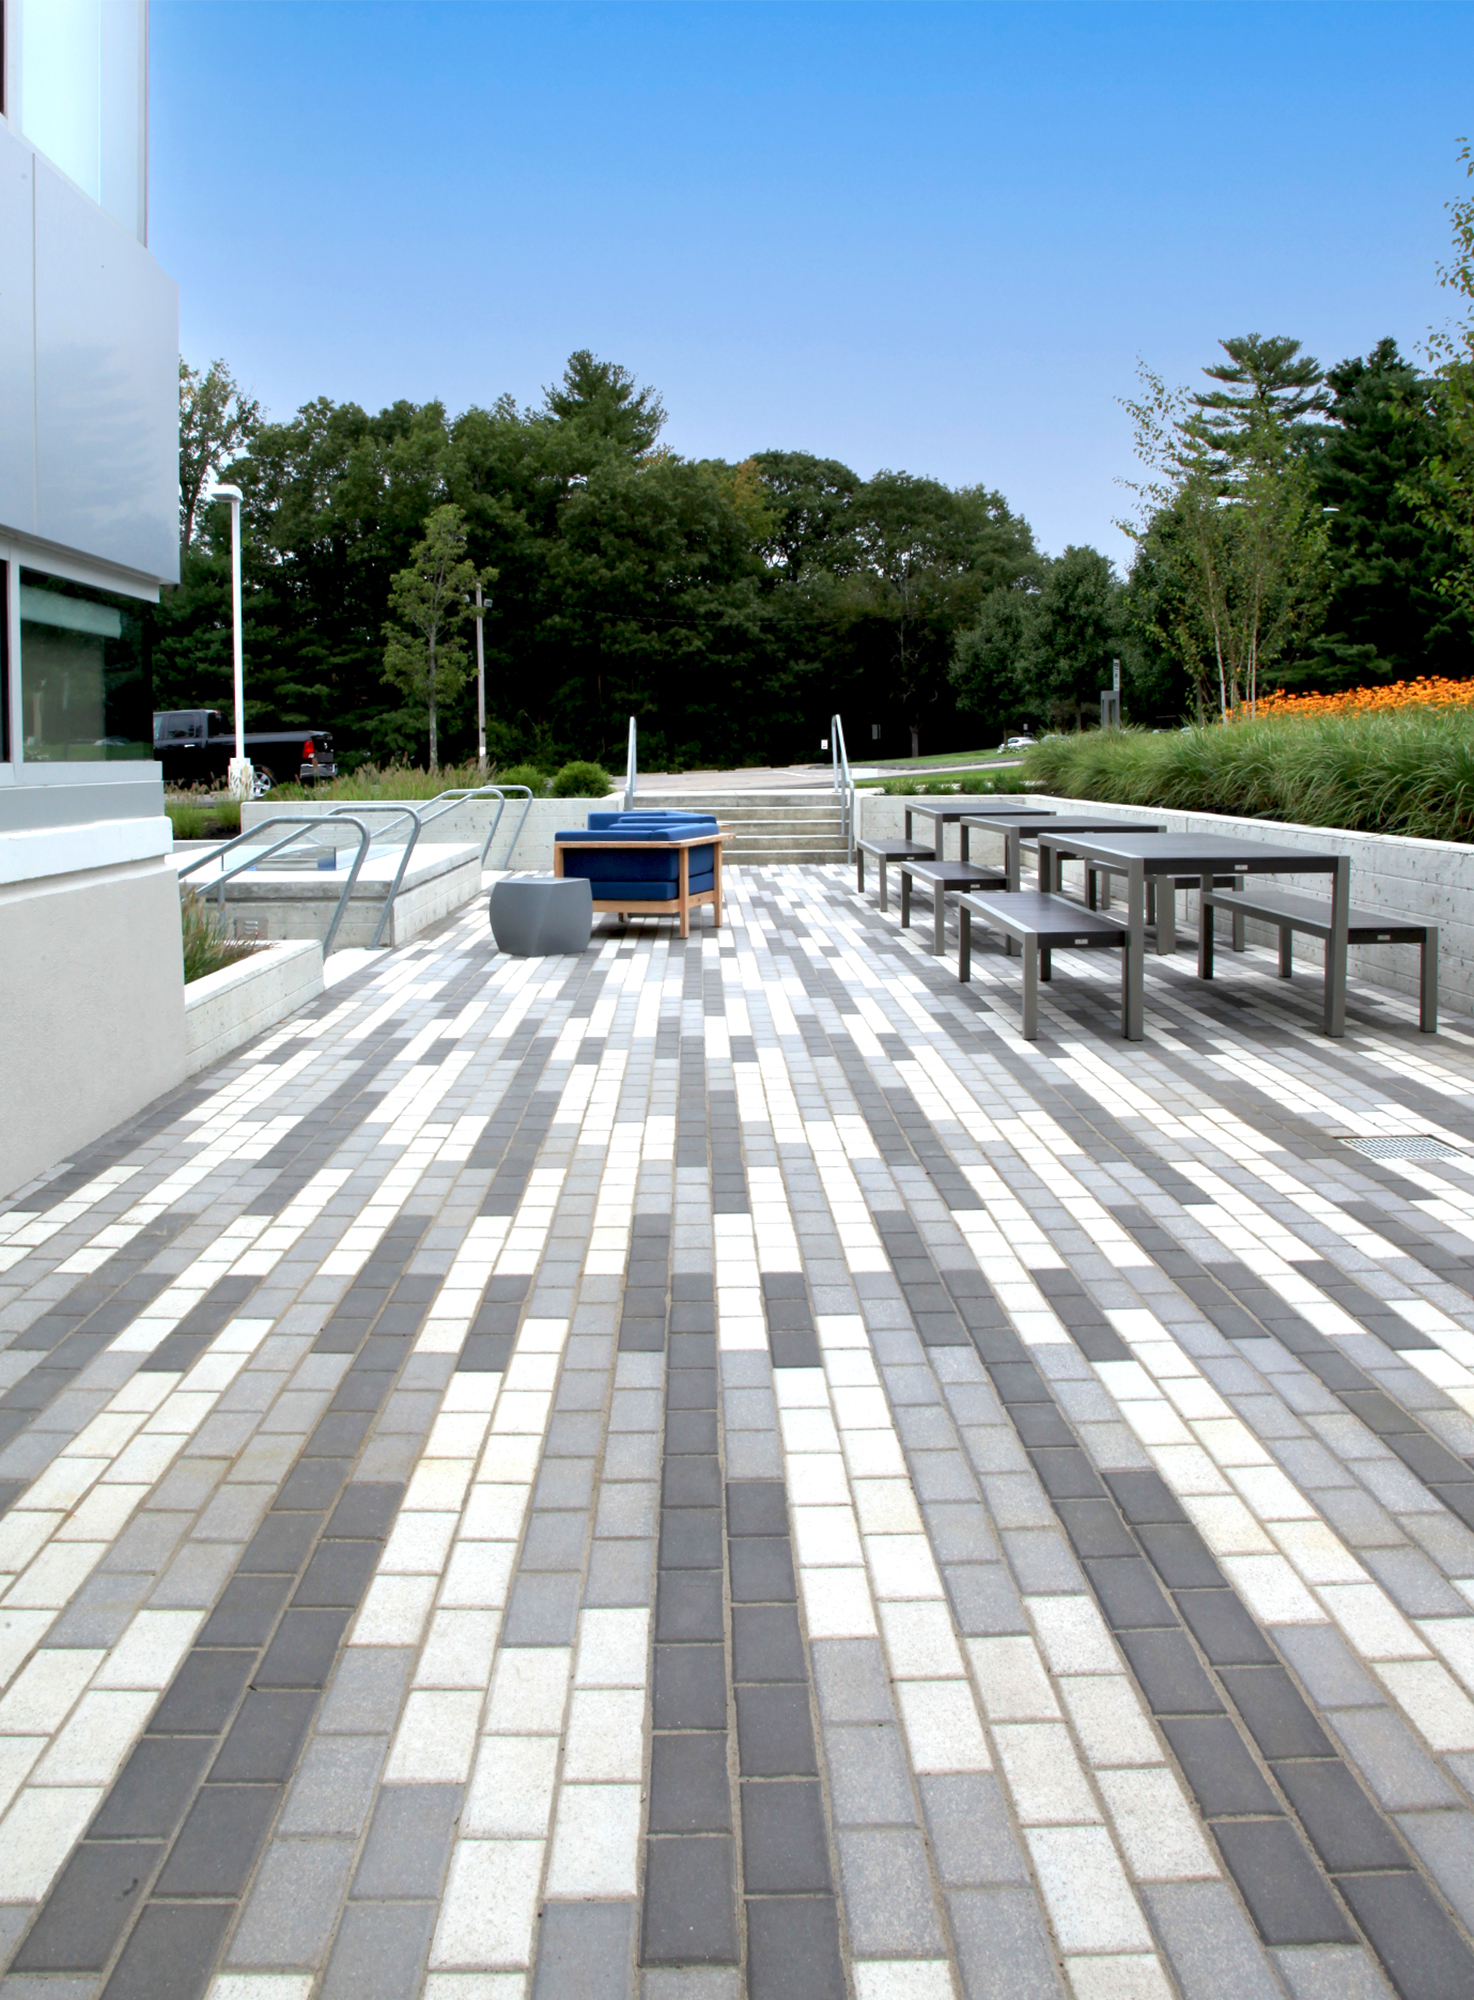 This outdoor amenity area features a 3 color linear pattern made from Unilock Umbriano pavers, modern furniture, and large orange umbrellas.